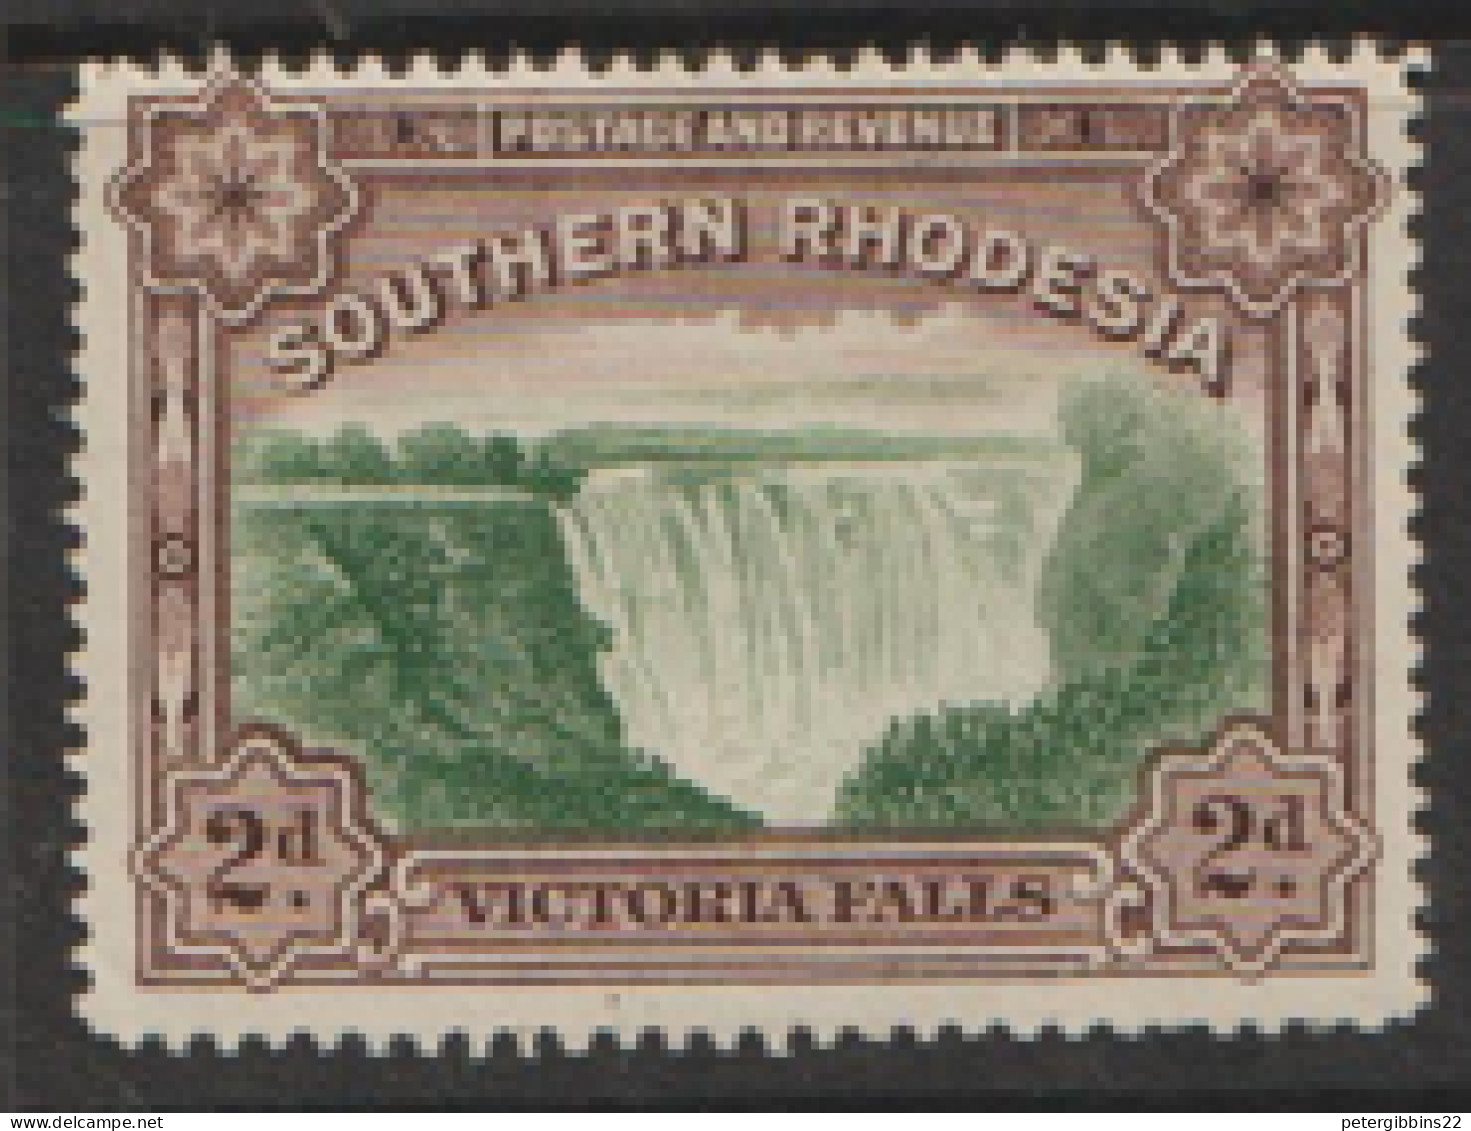 Southern Rhodesia  1932  SG 29 Victoria Falls  Unmounted Mint - Southern Rhodesia (...-1964)